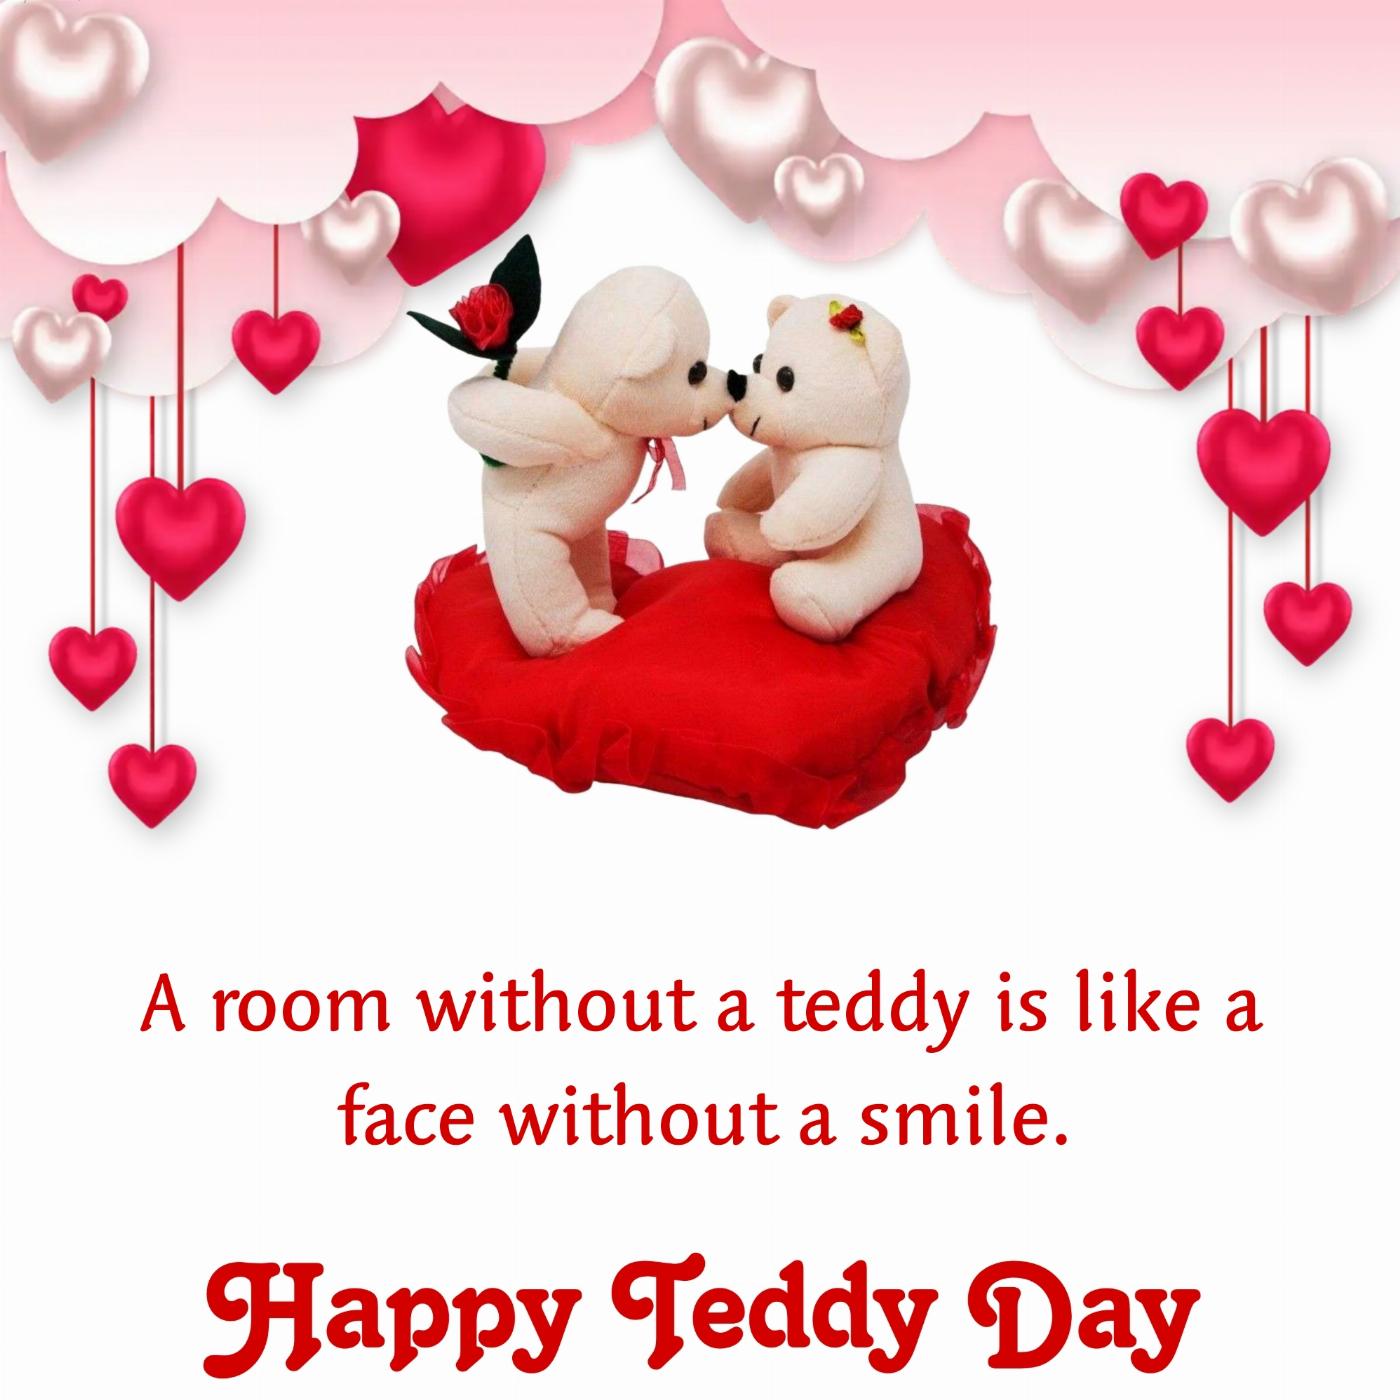 A room without a teddy is like a face without a smile